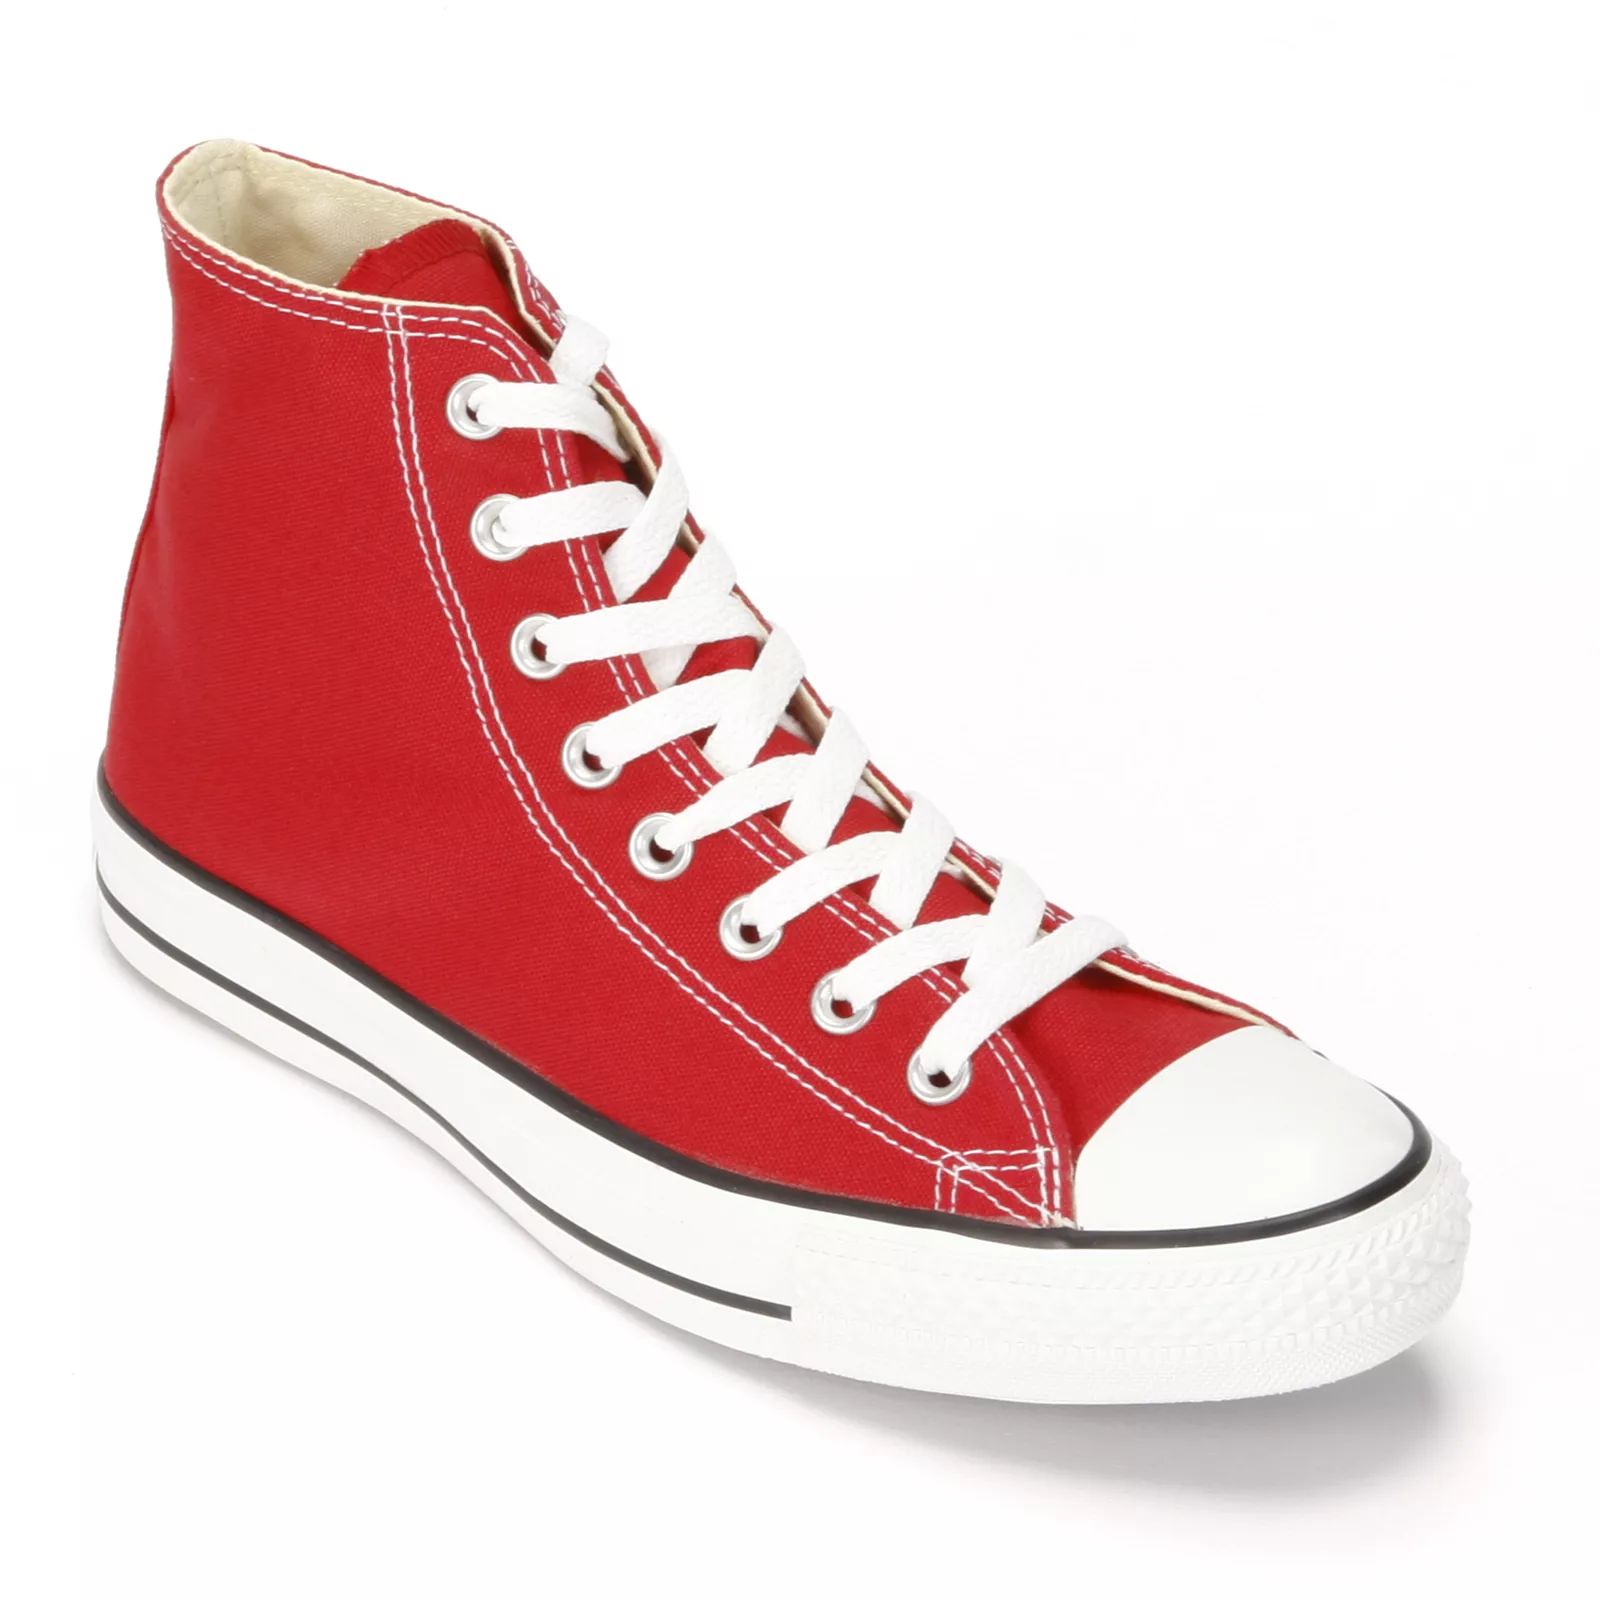 Adult Converse All Star Chuck Taylor High-Top Sneakers, Men's, Size: M8.5W10.5, Red | Kohl's